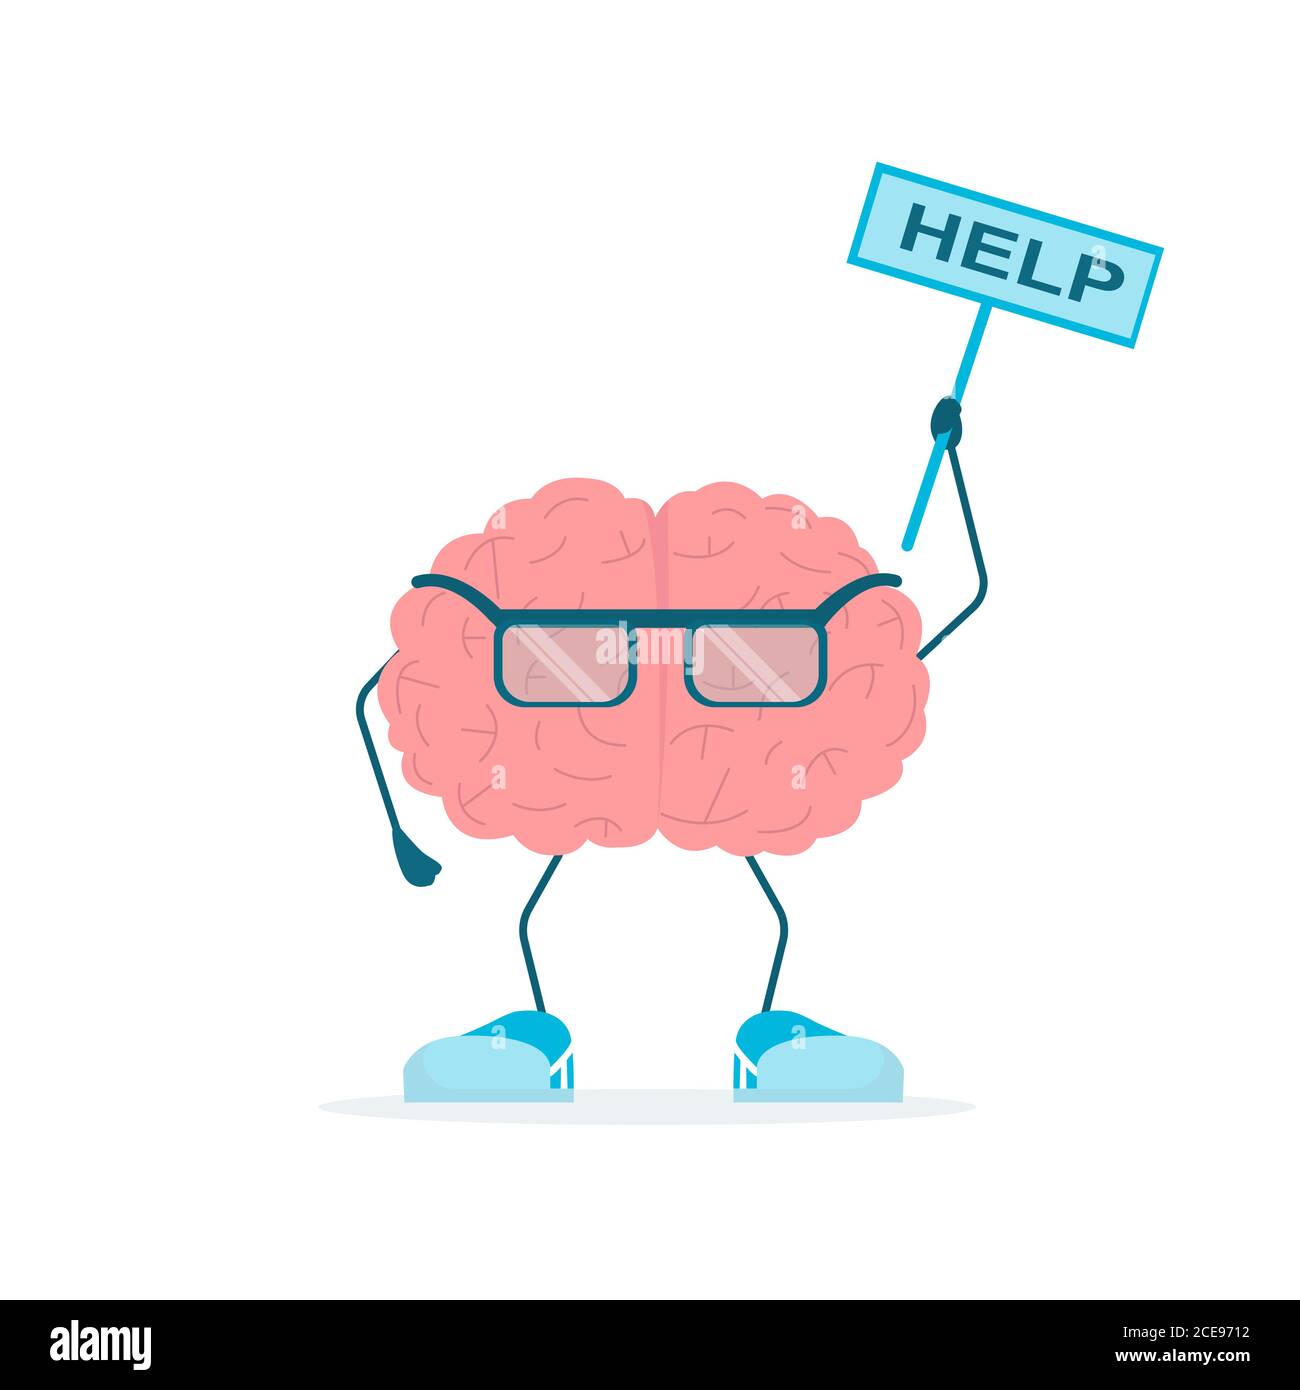 Brain Character Holding Sign Help Standing On White Background, Illustration Stock Vector